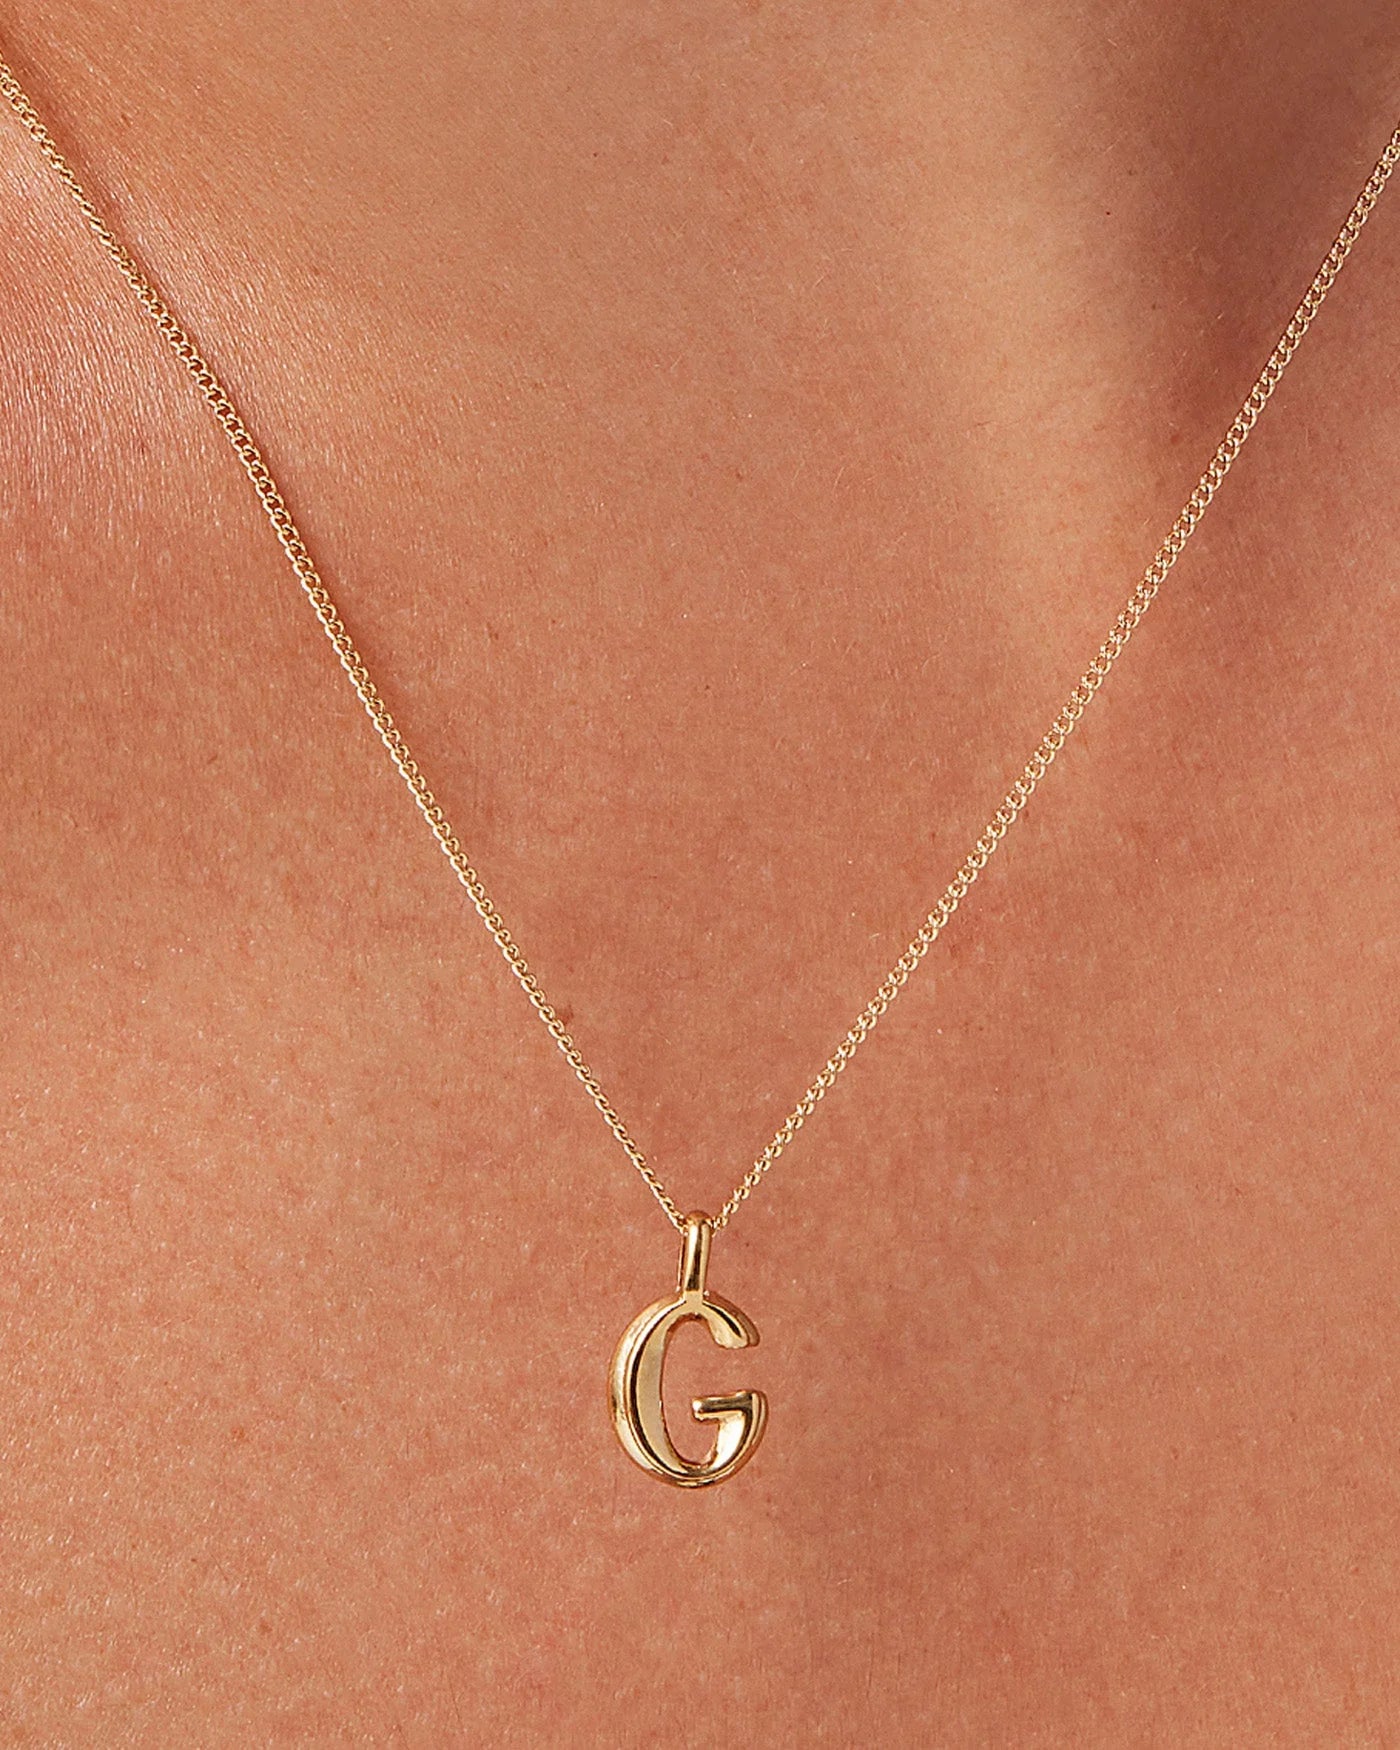 Monogram Necklace in Gold - G